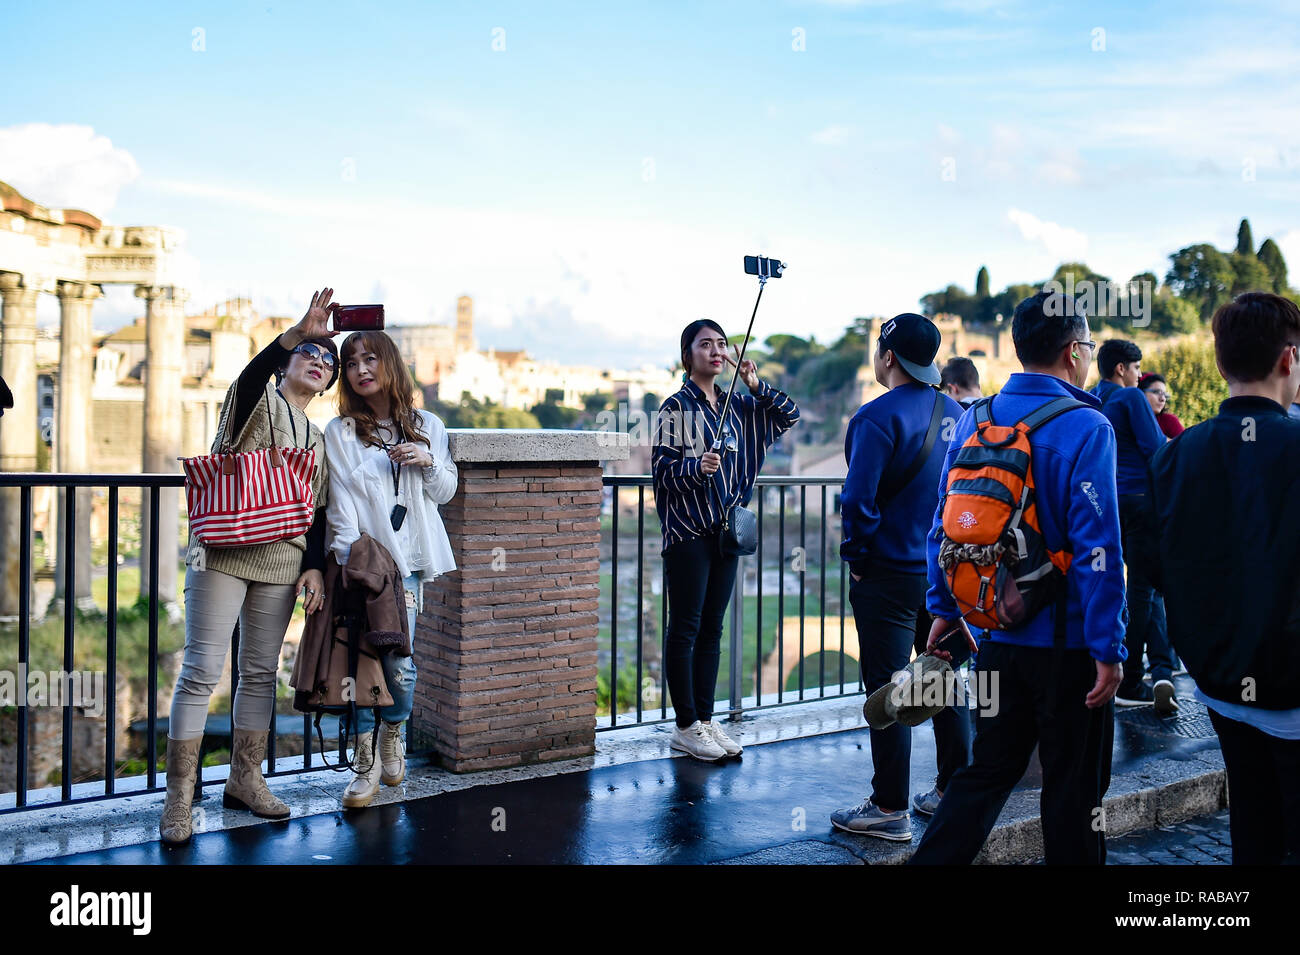 Some Chinese tourists are taking selfies in front of the beautiful Roman Forums in Rome, Italy. Stock Photo